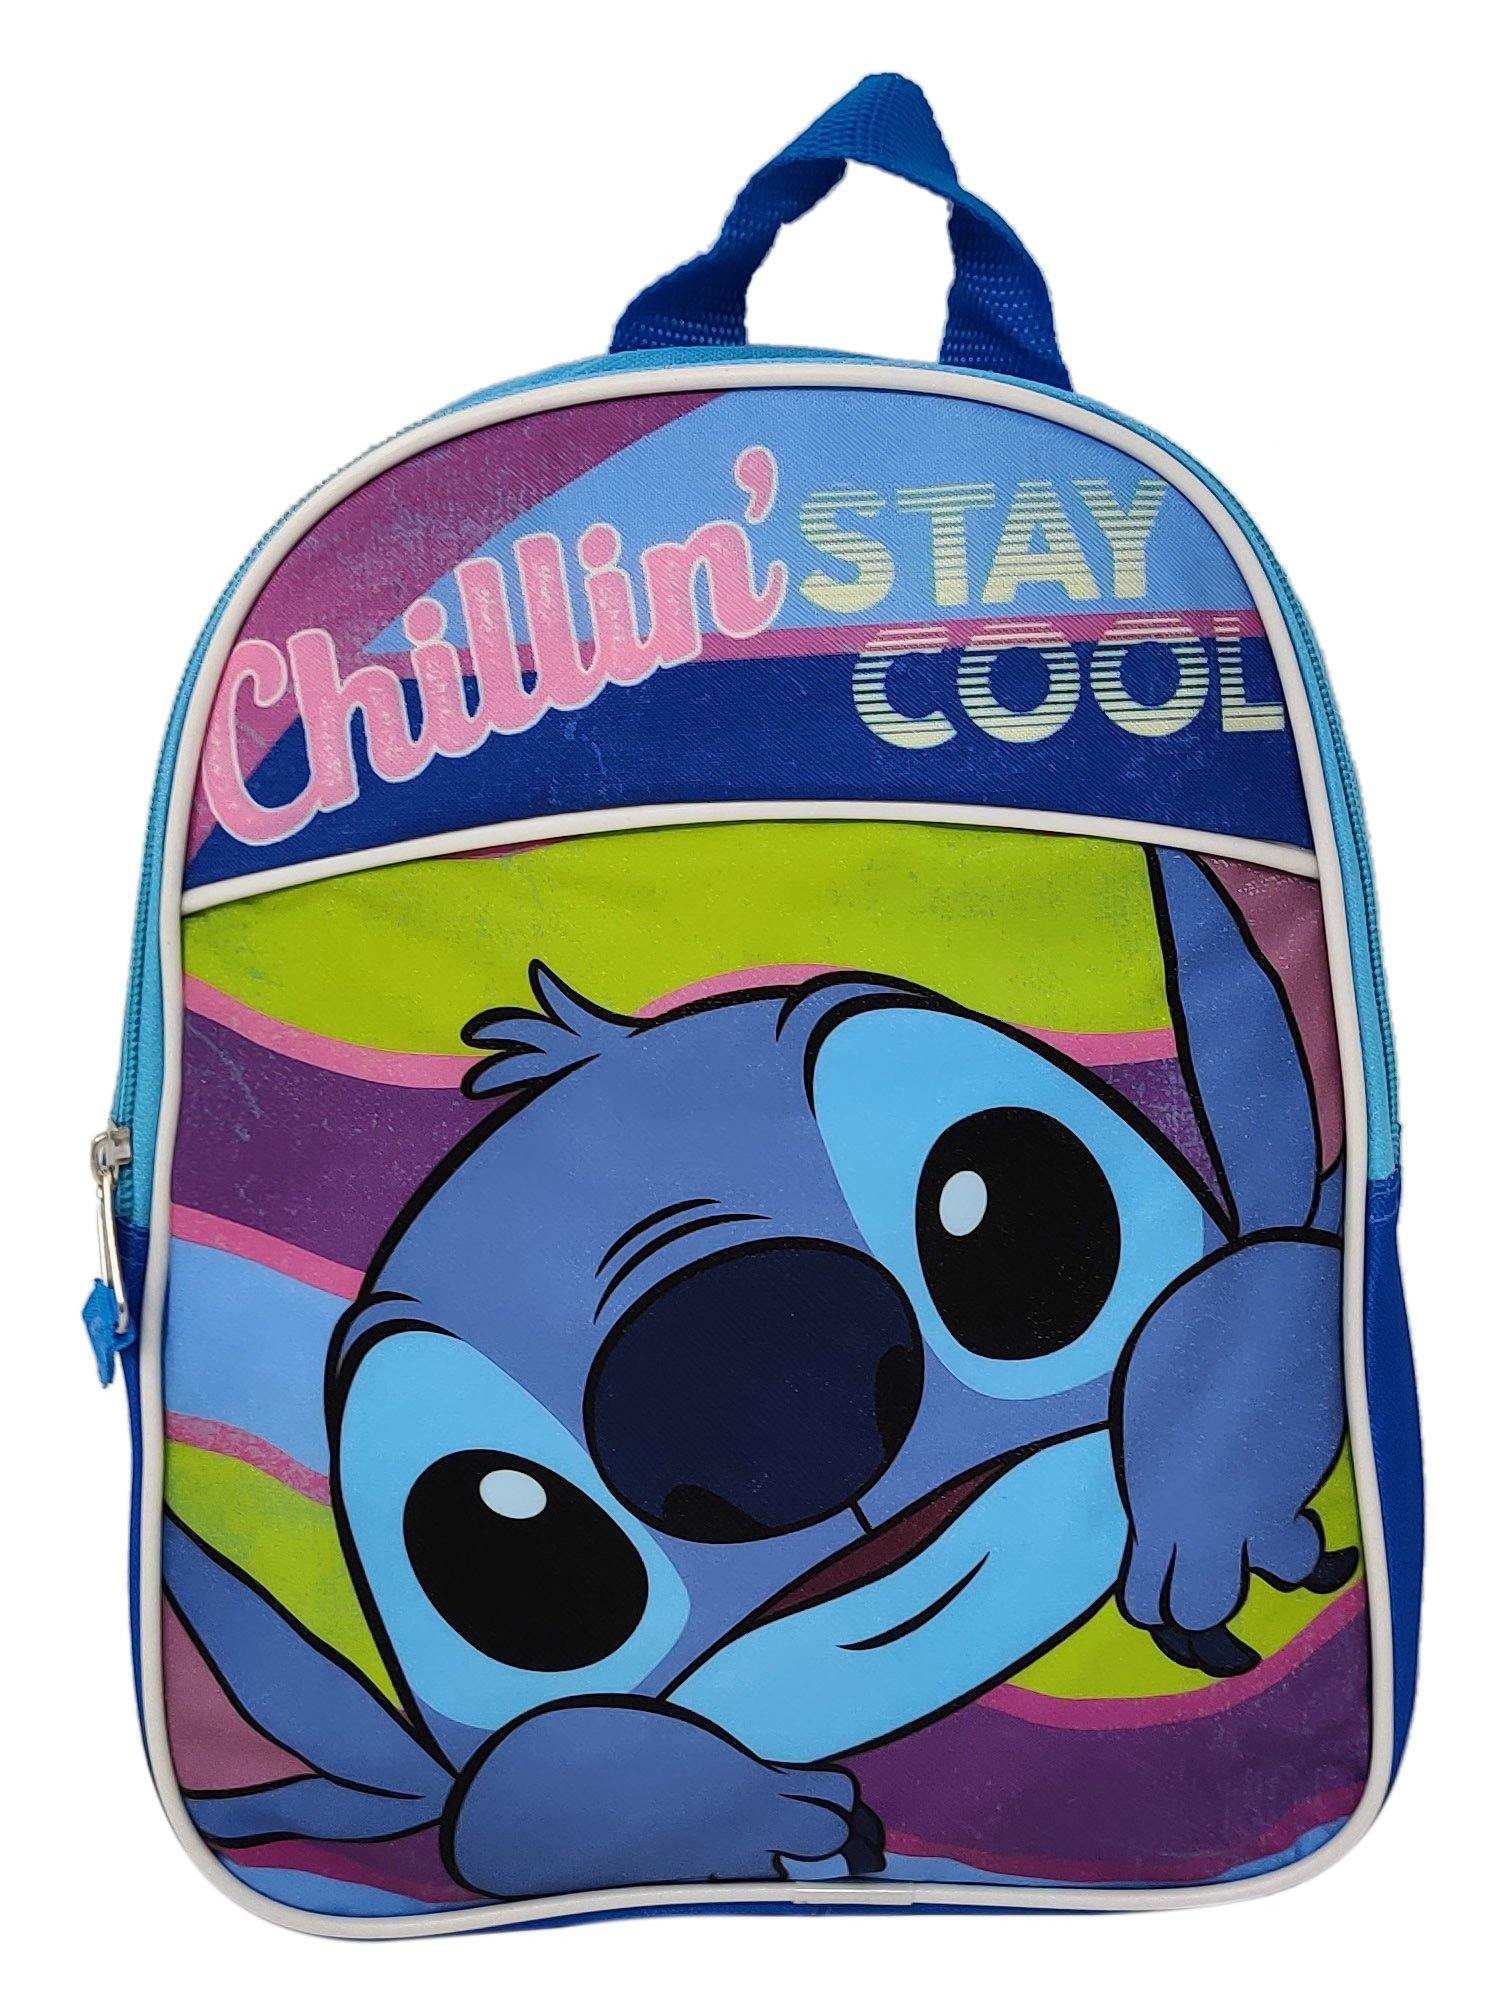 Disney Parks Lilo & Stitch Lunch Bag Lunch Box Backpack